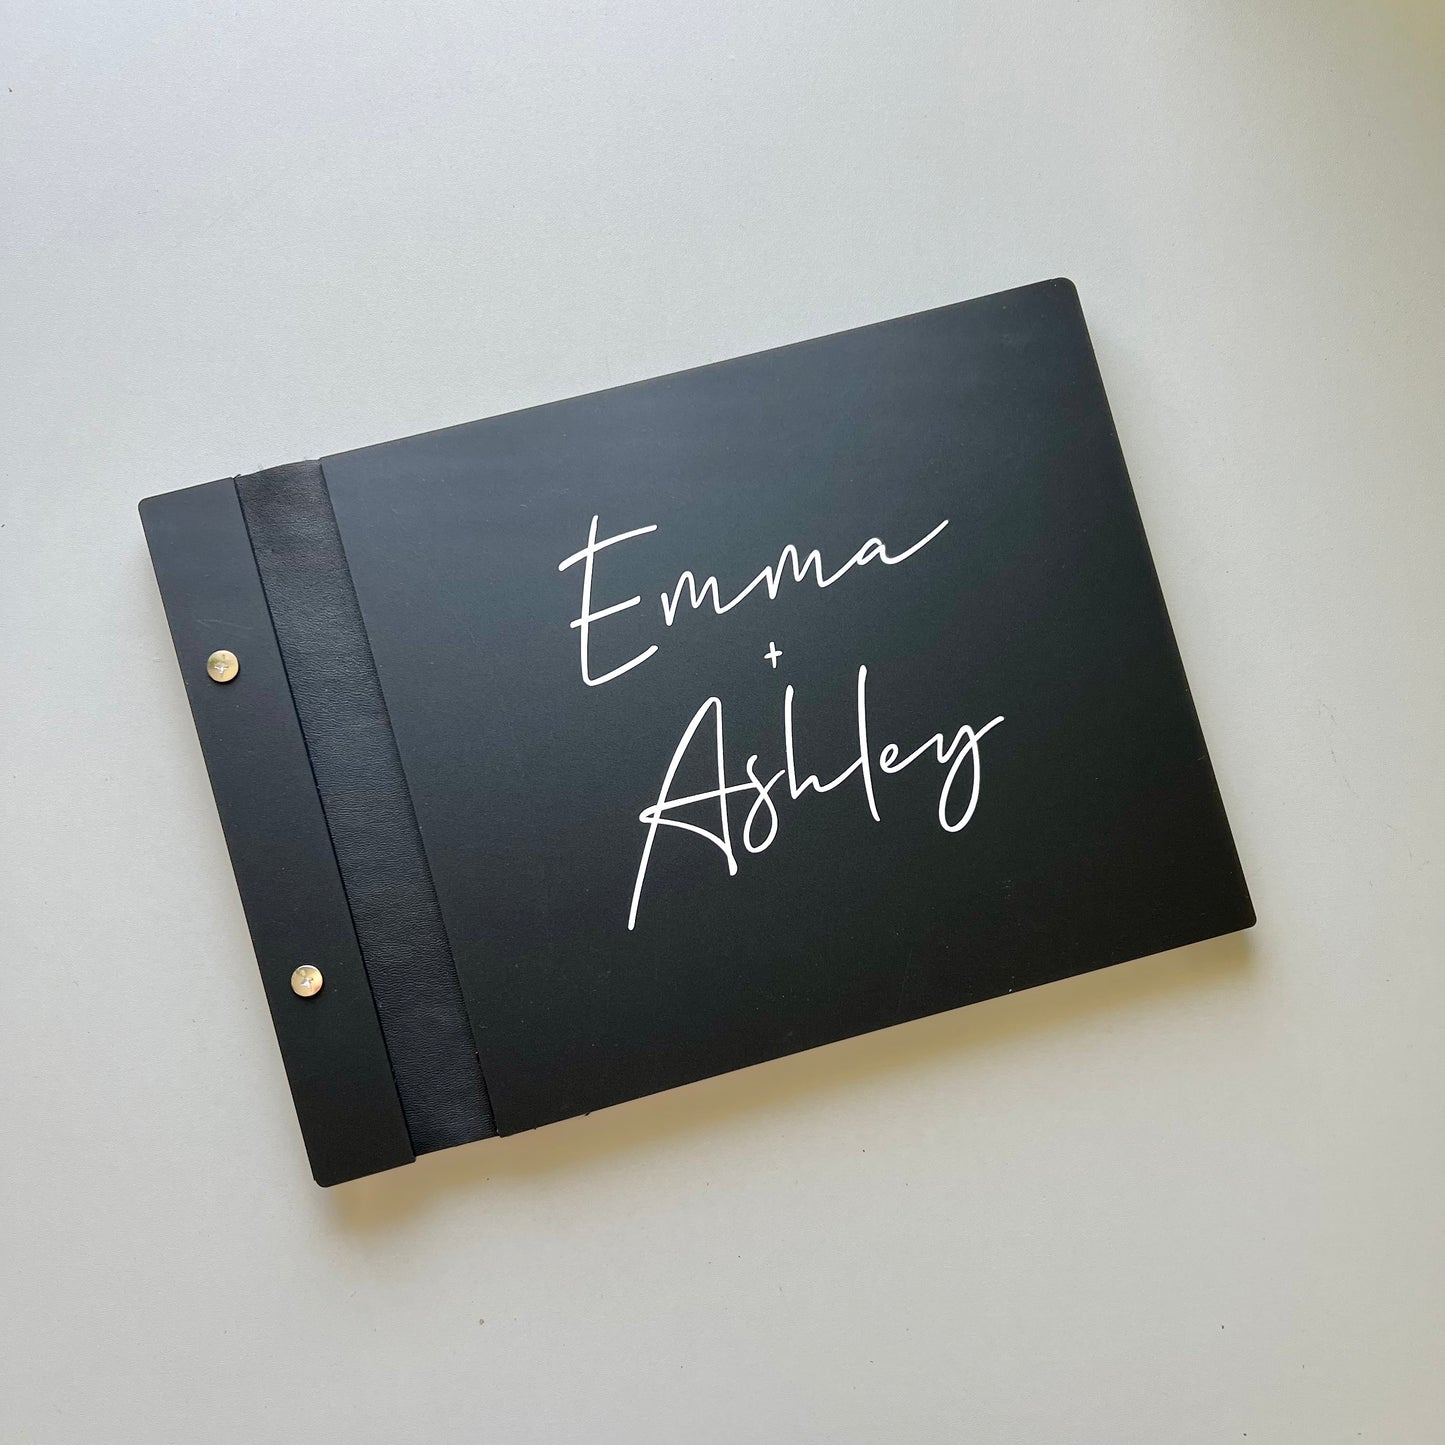 The Emma guest book in acrylic